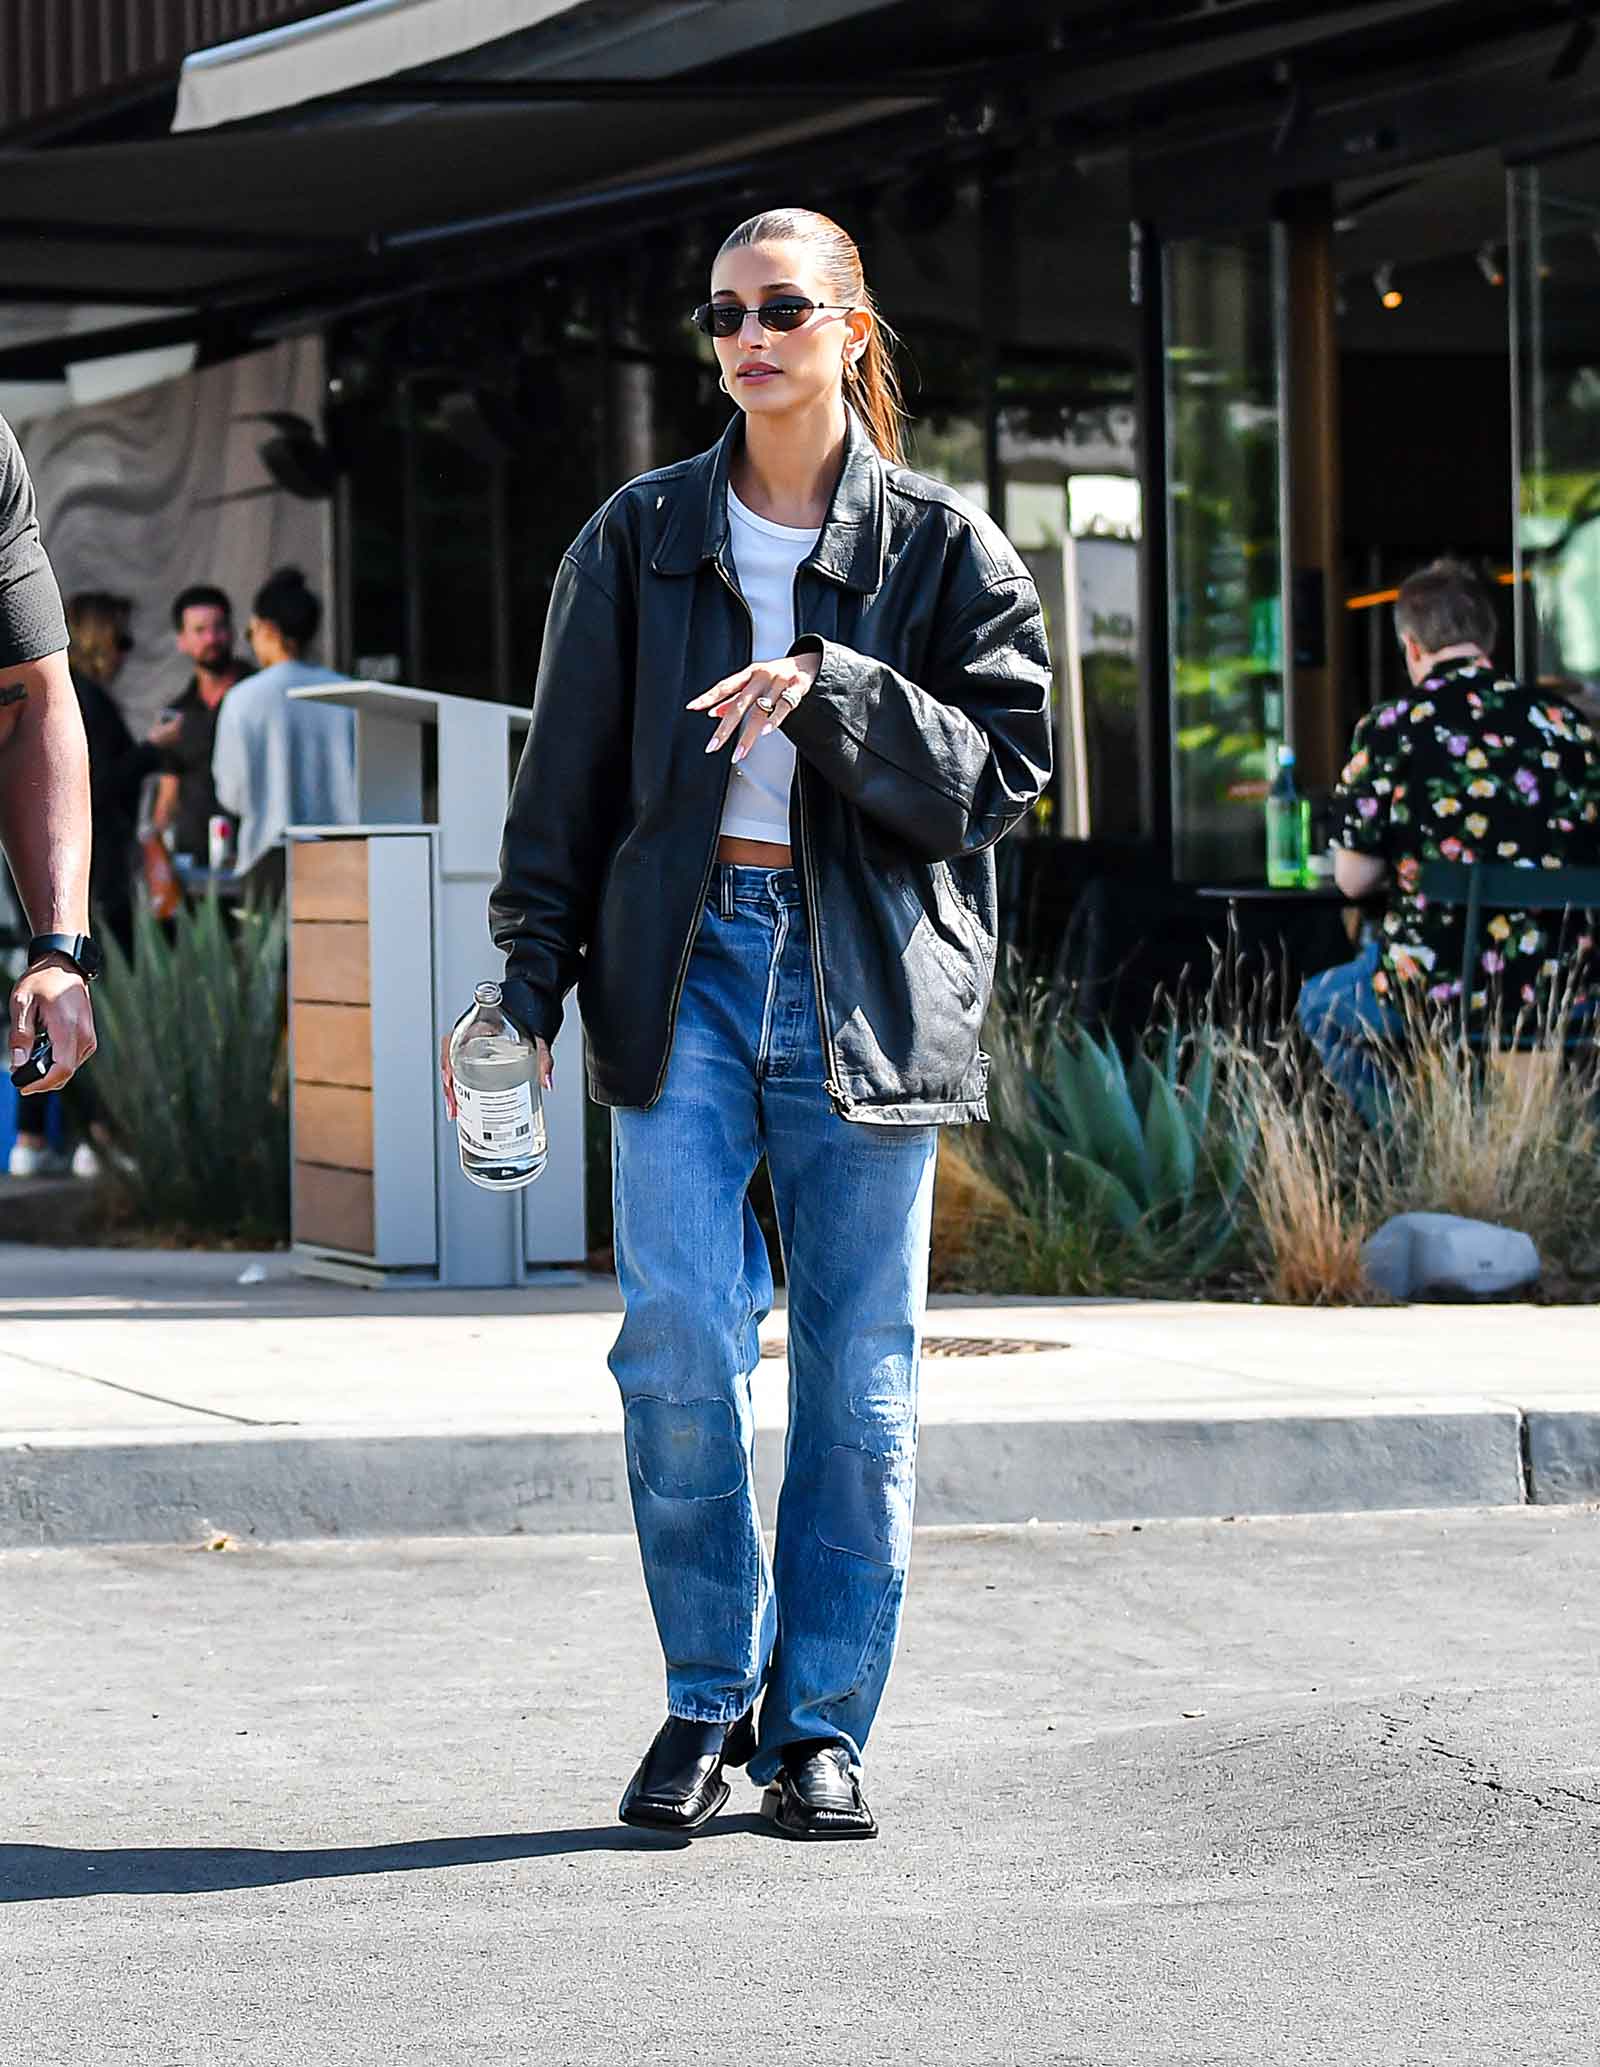 Hailey Beiber's oversized leather jacket and baggy jeans look for less